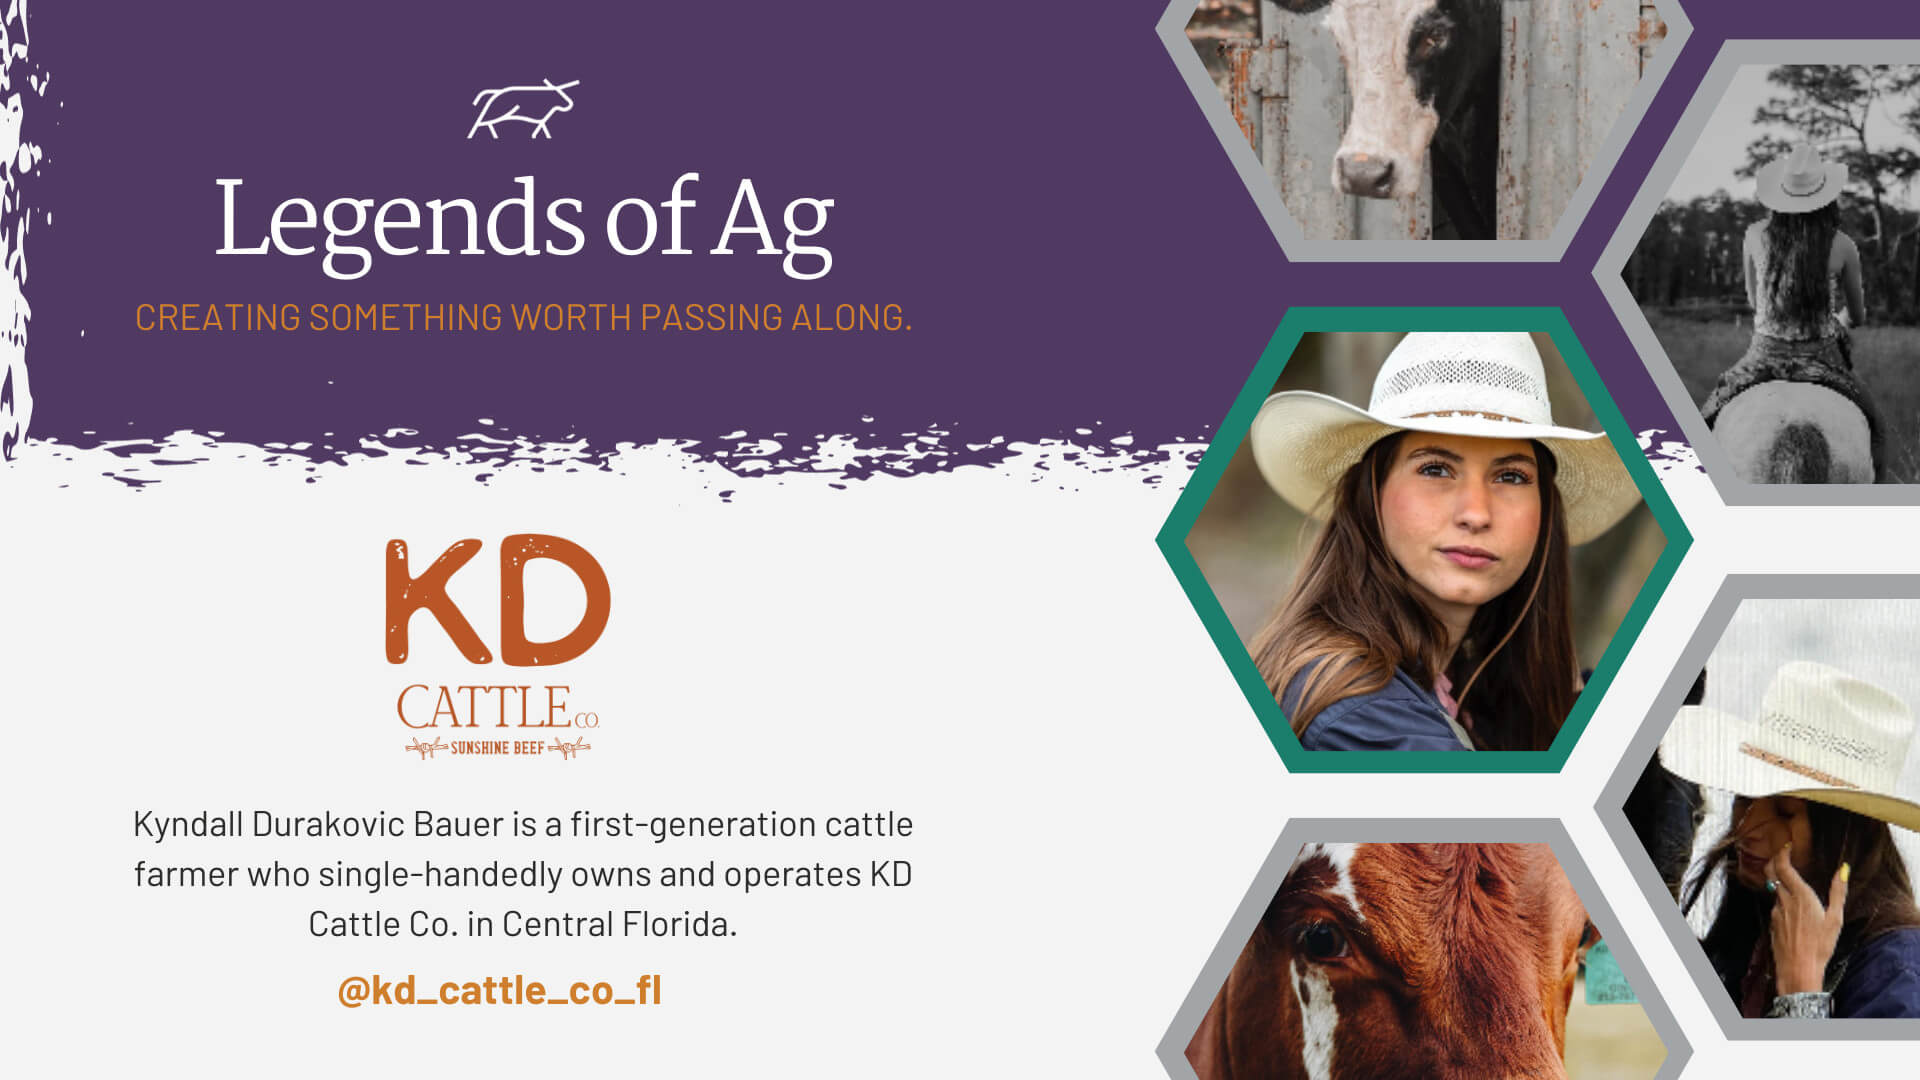 KD Cattle Co Legends of Ag